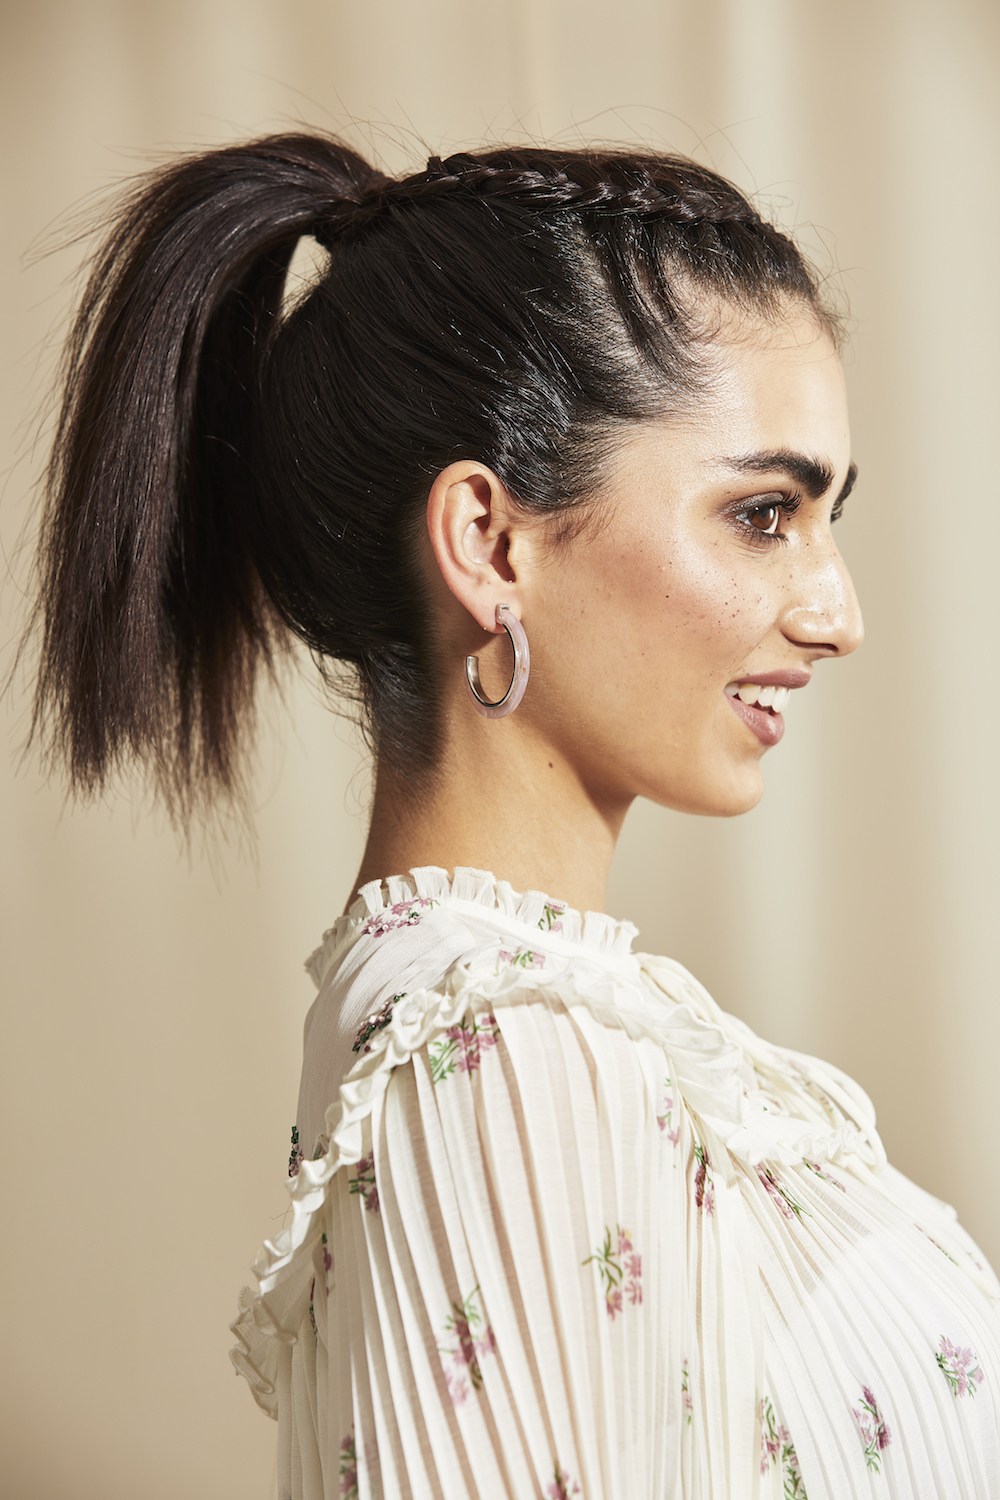 8 Popular Hairstyle Trends for Halloween